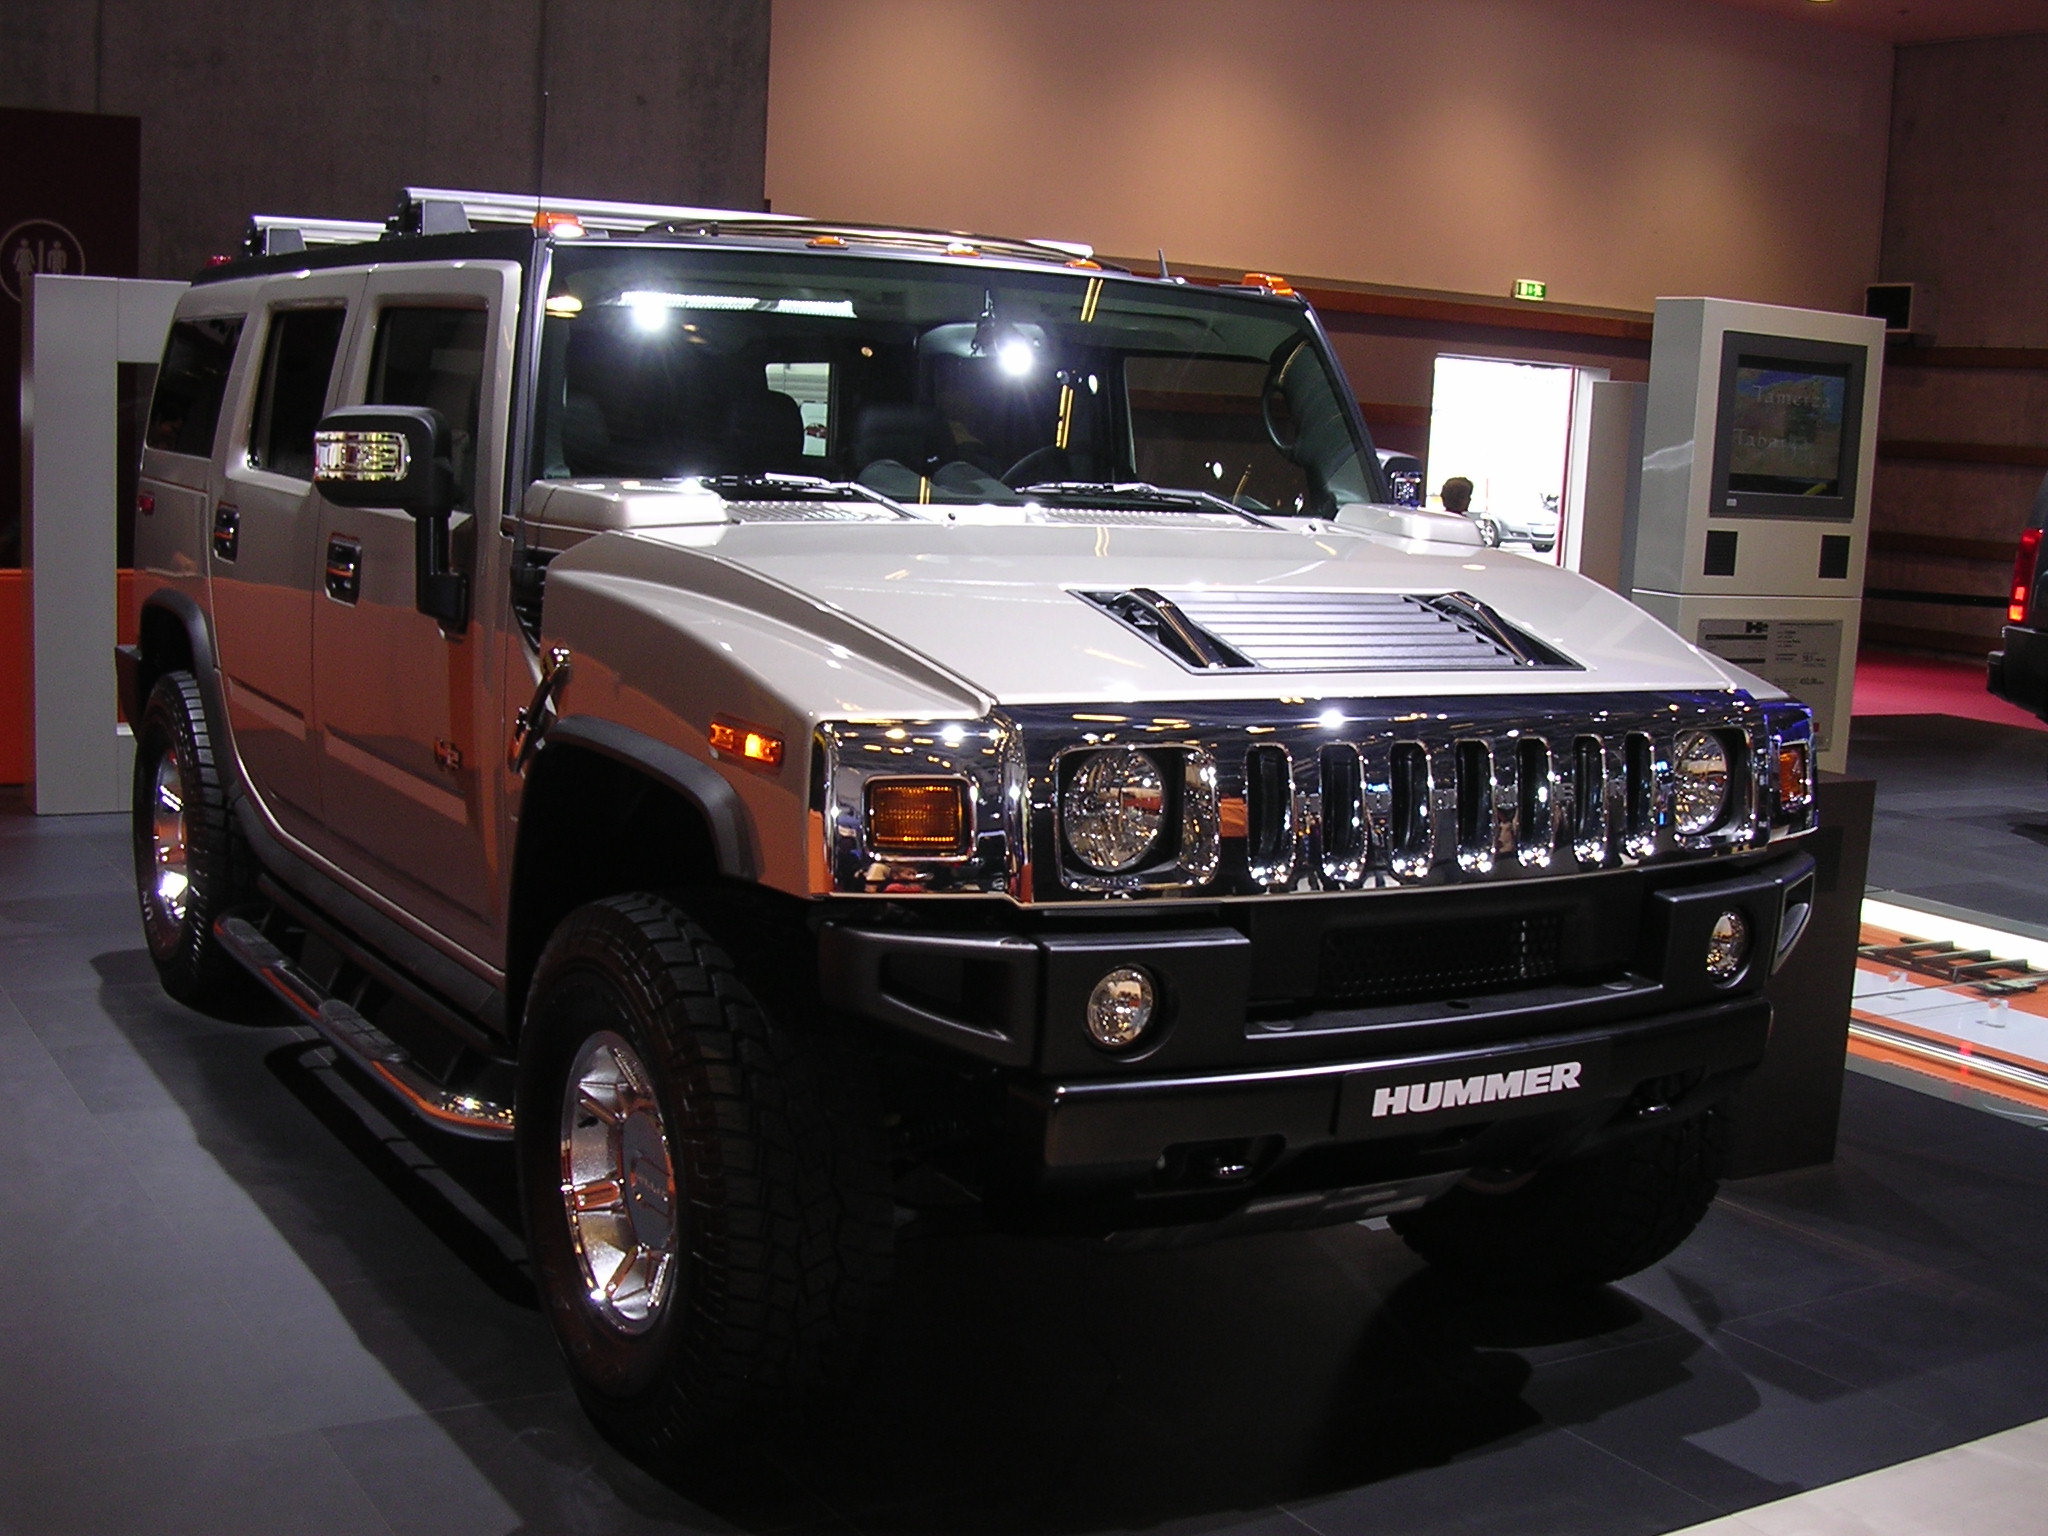 2012 Hummer H2 The Legend oriented SUV